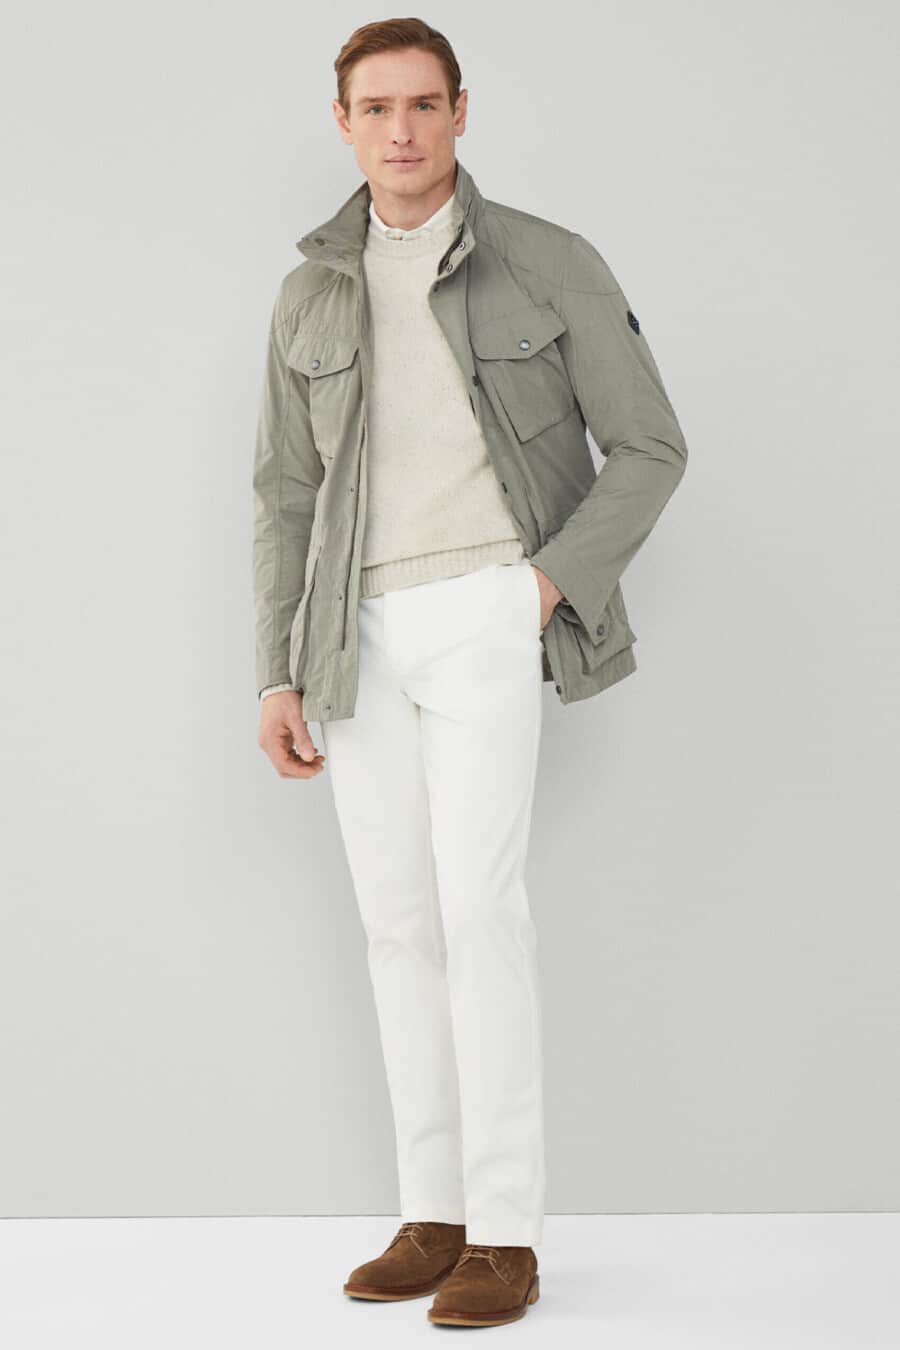 Men's white pants, white shirt, cream sweater, light green-grey field jacket and brown suede shoes smart-casual outfit